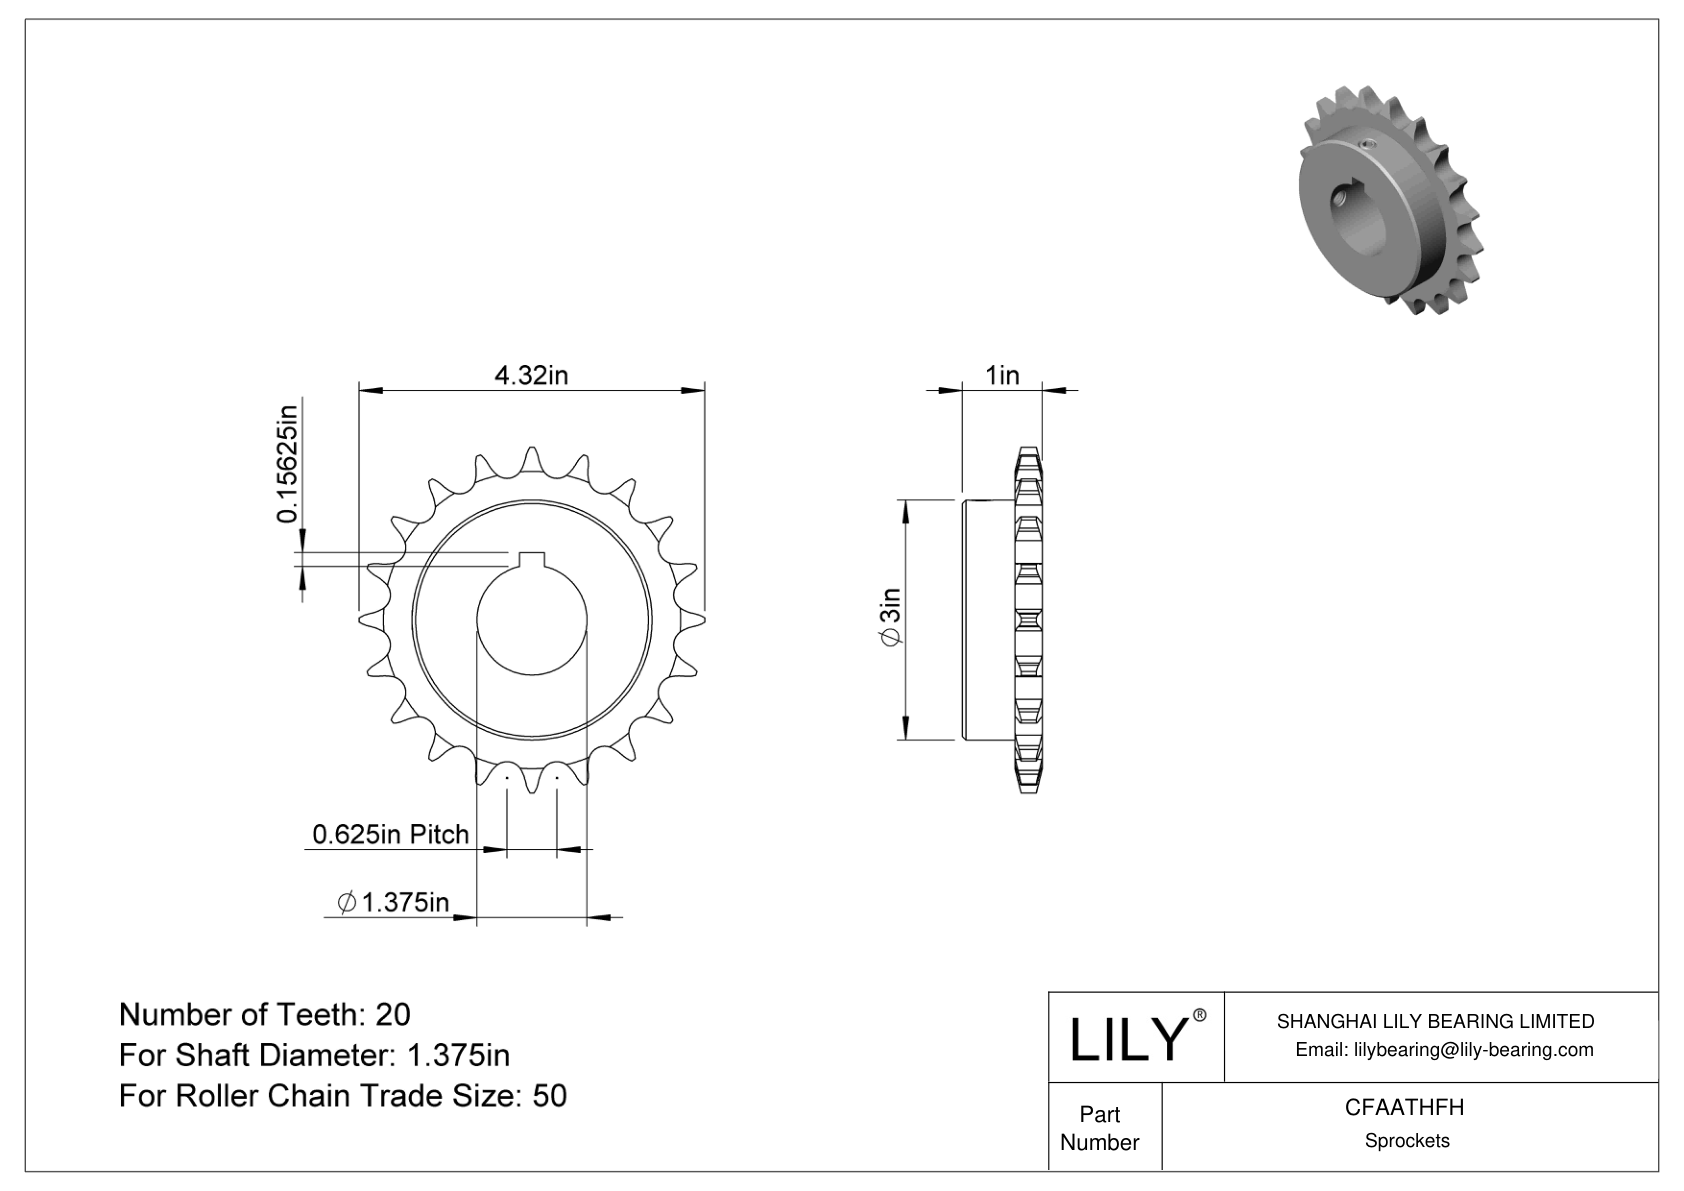 CFAATHFH Wear-Resistant Sprockets for ANSI Roller Chain cad drawing